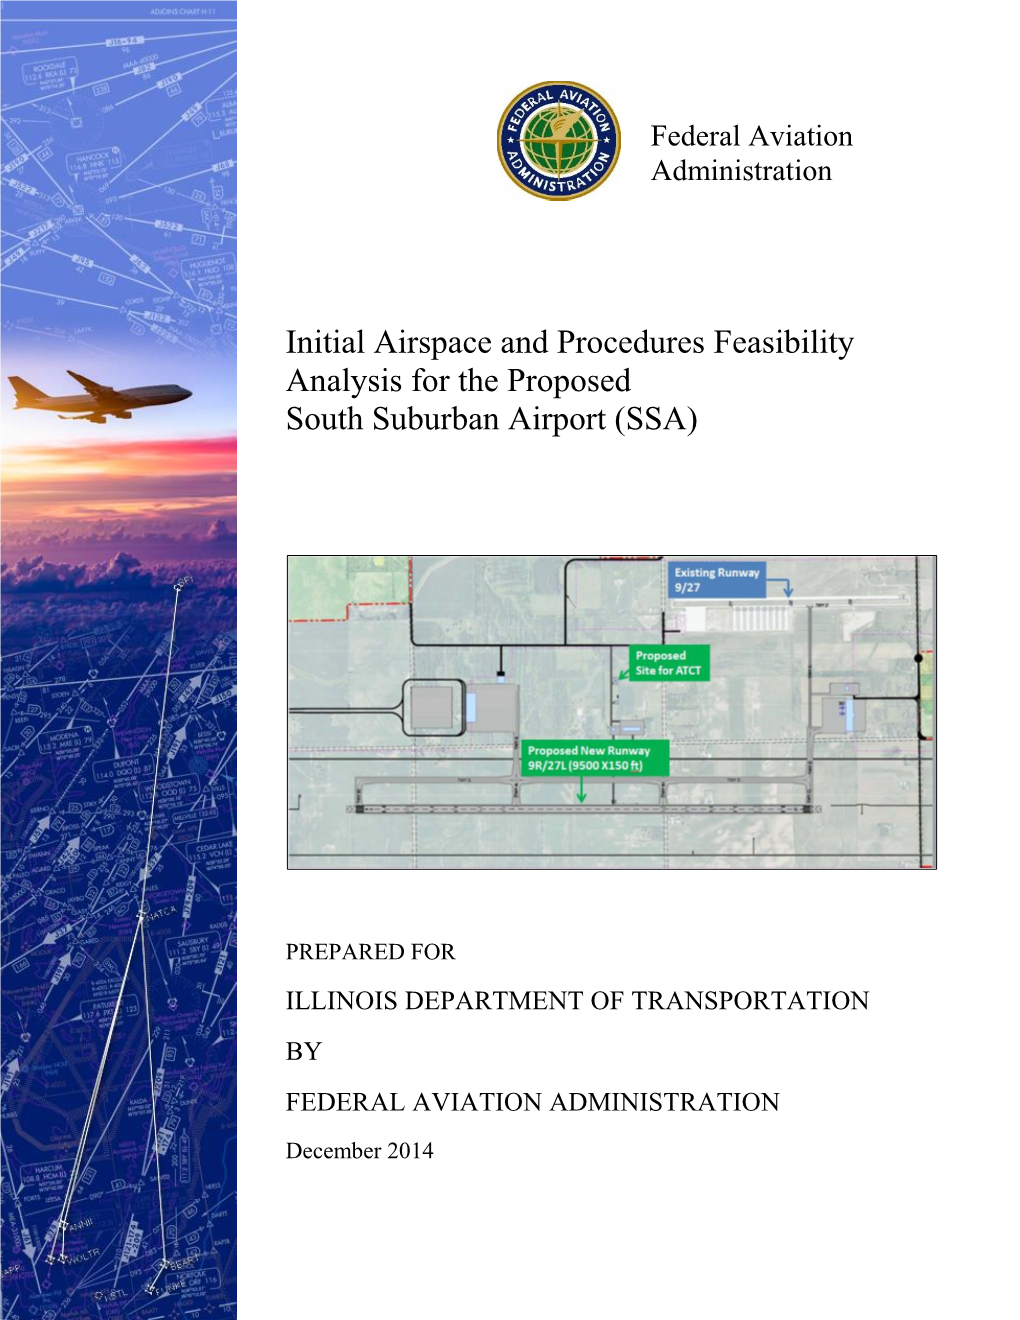 Initial Airspace and Procedures Feasibility Analysis for the Proposed South Suburban Airport (SSA)